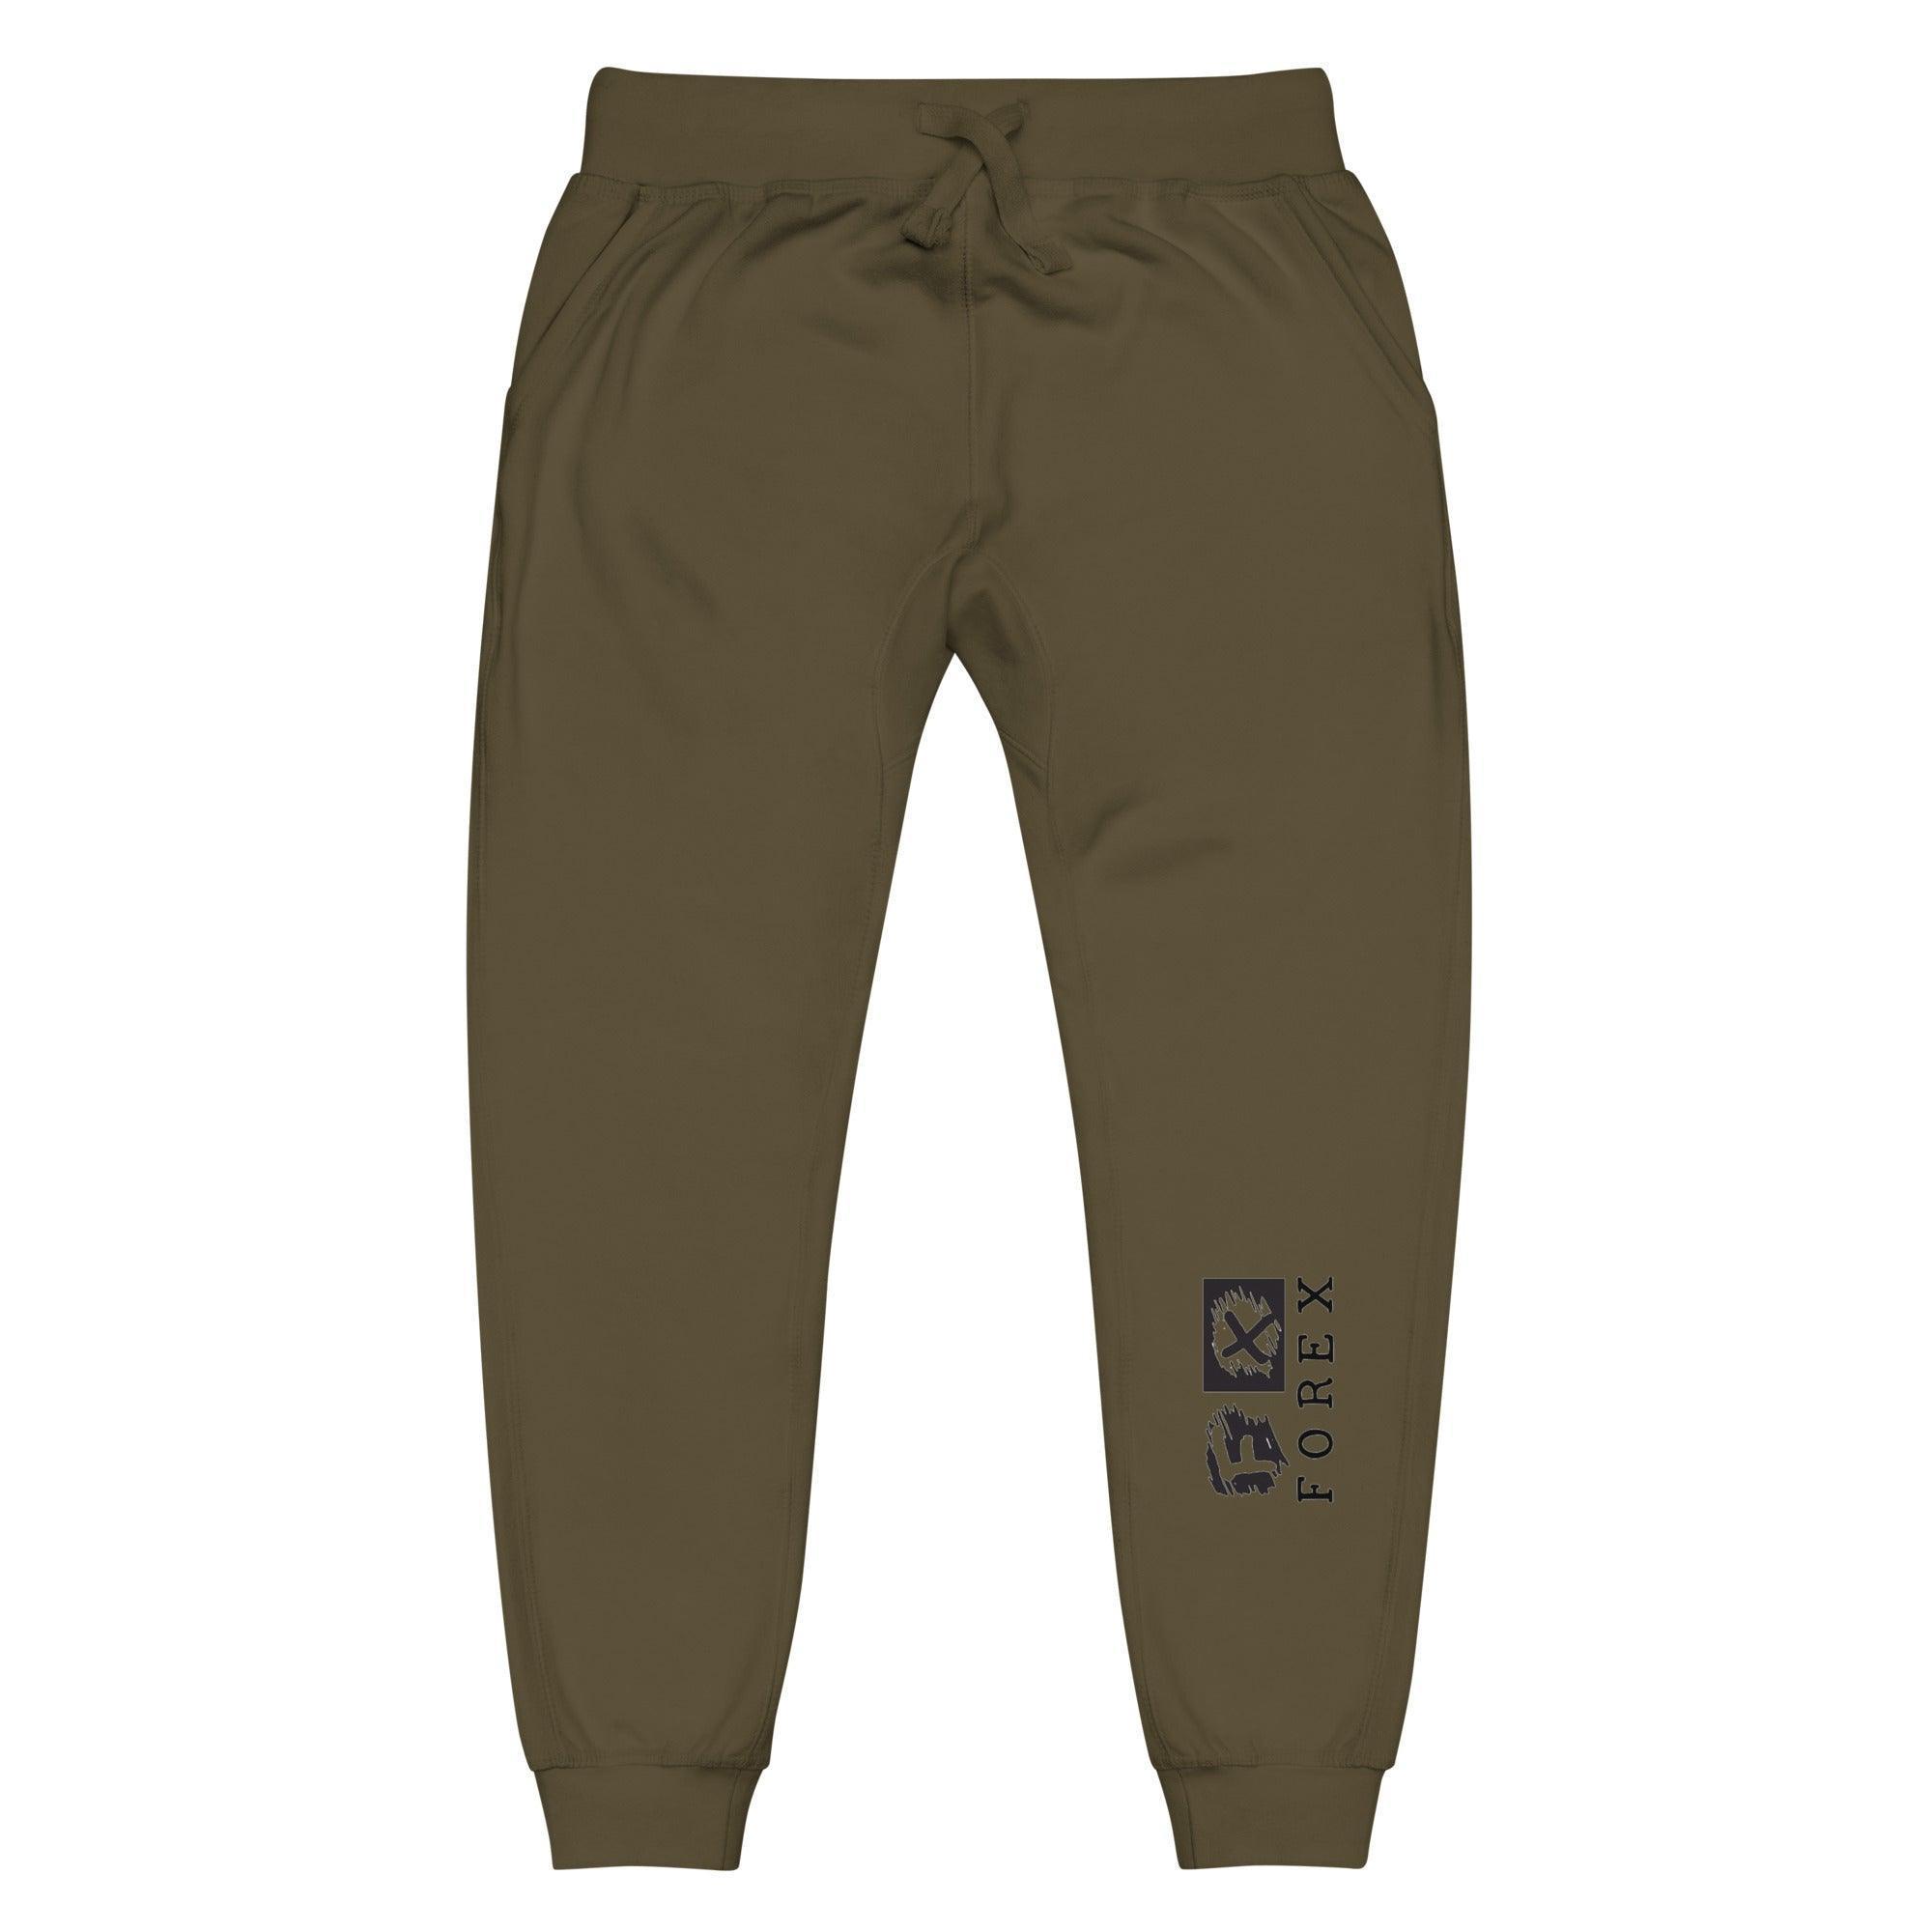 FX | Forex Sweatpants - InvestmenTees